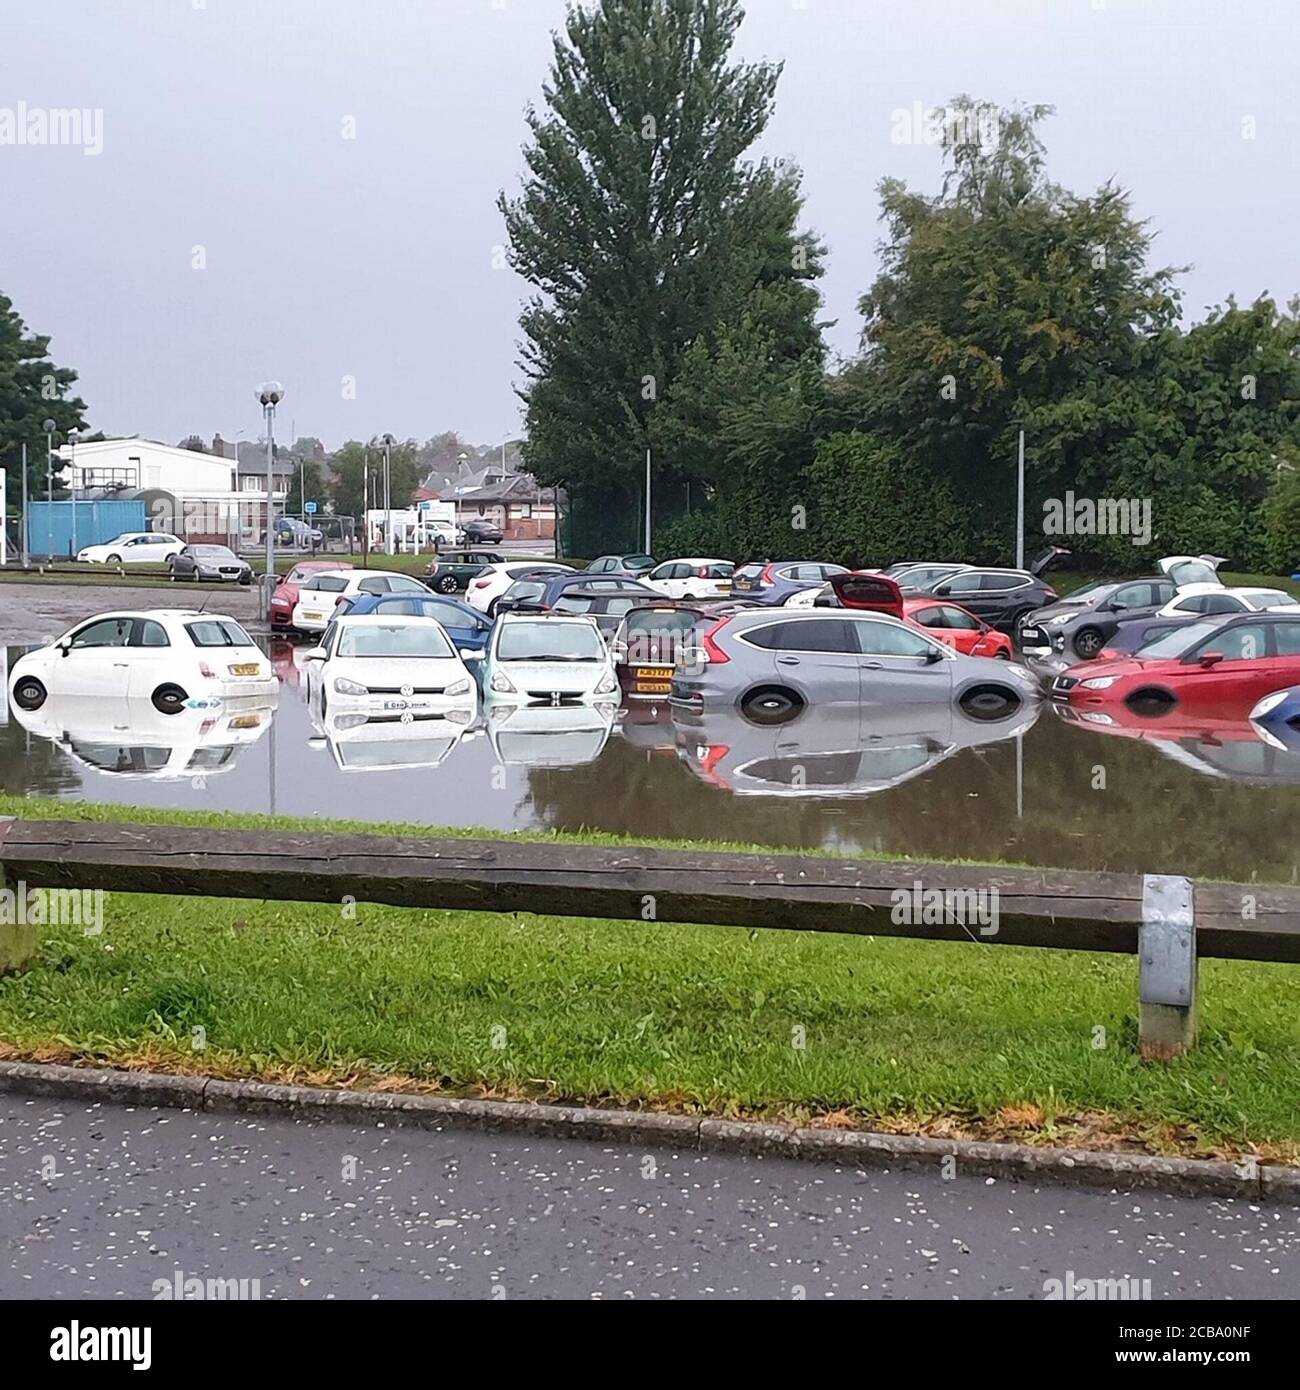 Flooding at Queen Victoria Hospital, in Kirkcaldy, Fife, Scotland. Thunderstorm warnings are still current for most of the UK on Wednesday, while high temperatures are forecast again for many parts of England. Stock Photo